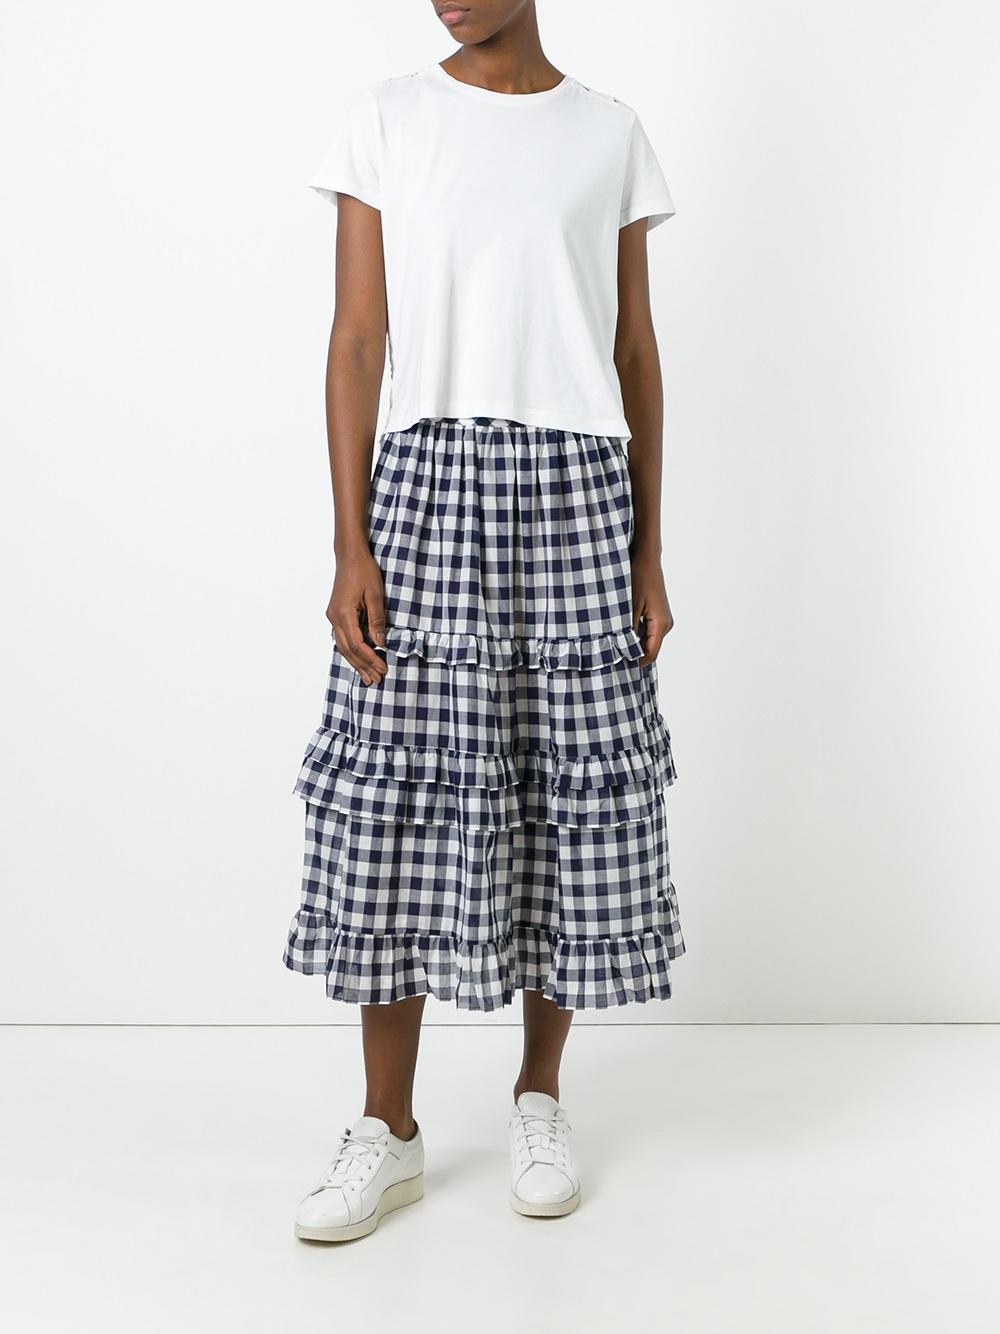 Twin set in the outlet twin-set gingham check skirt 305m mid blu women clothing full skirts,twin  set ... XRZPVYB